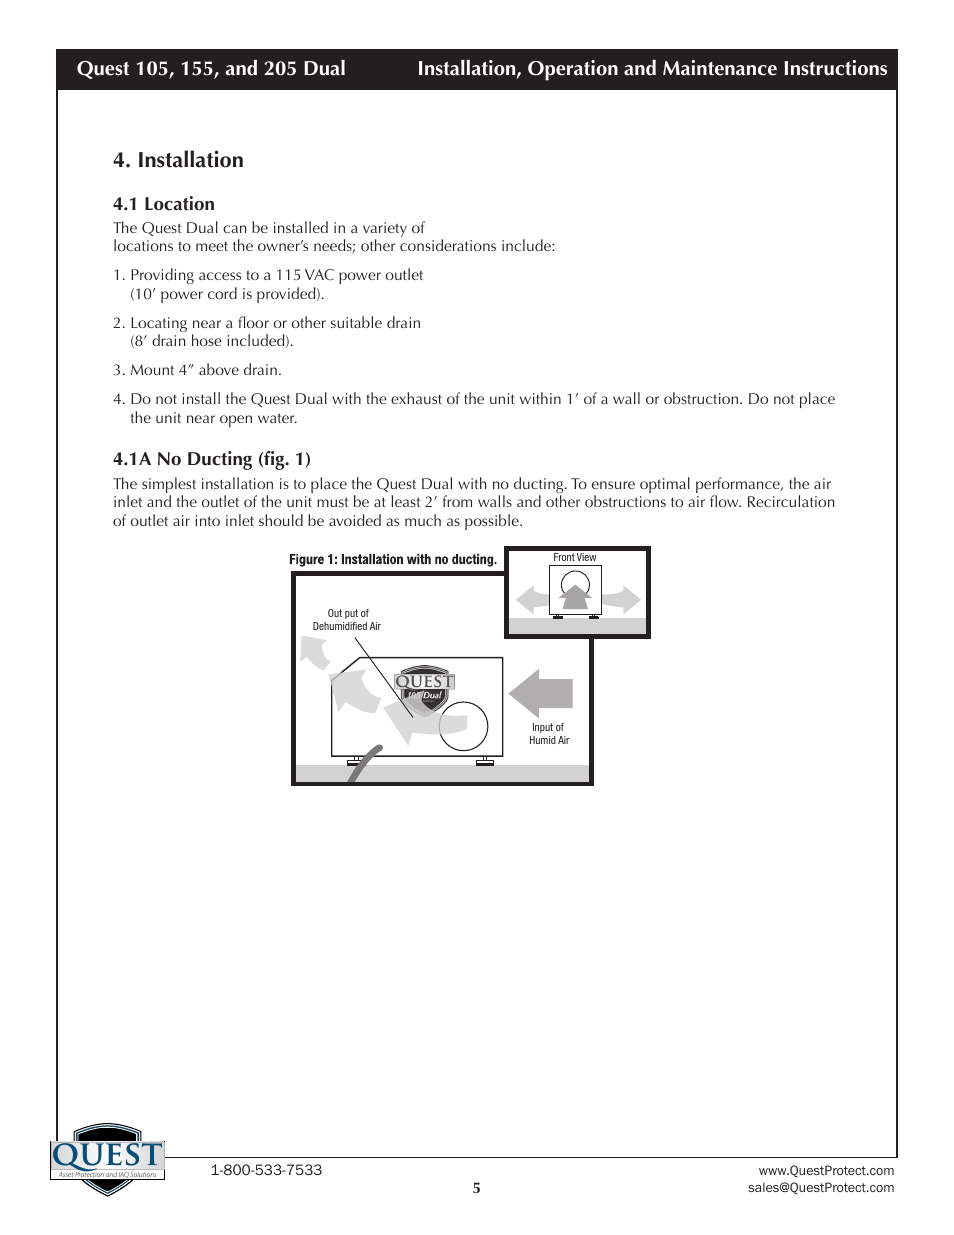 Quest, Installation | Sunlight Supply Quest Dual 155 Overhead Dehumidifier User Manual | Page 5 / 15